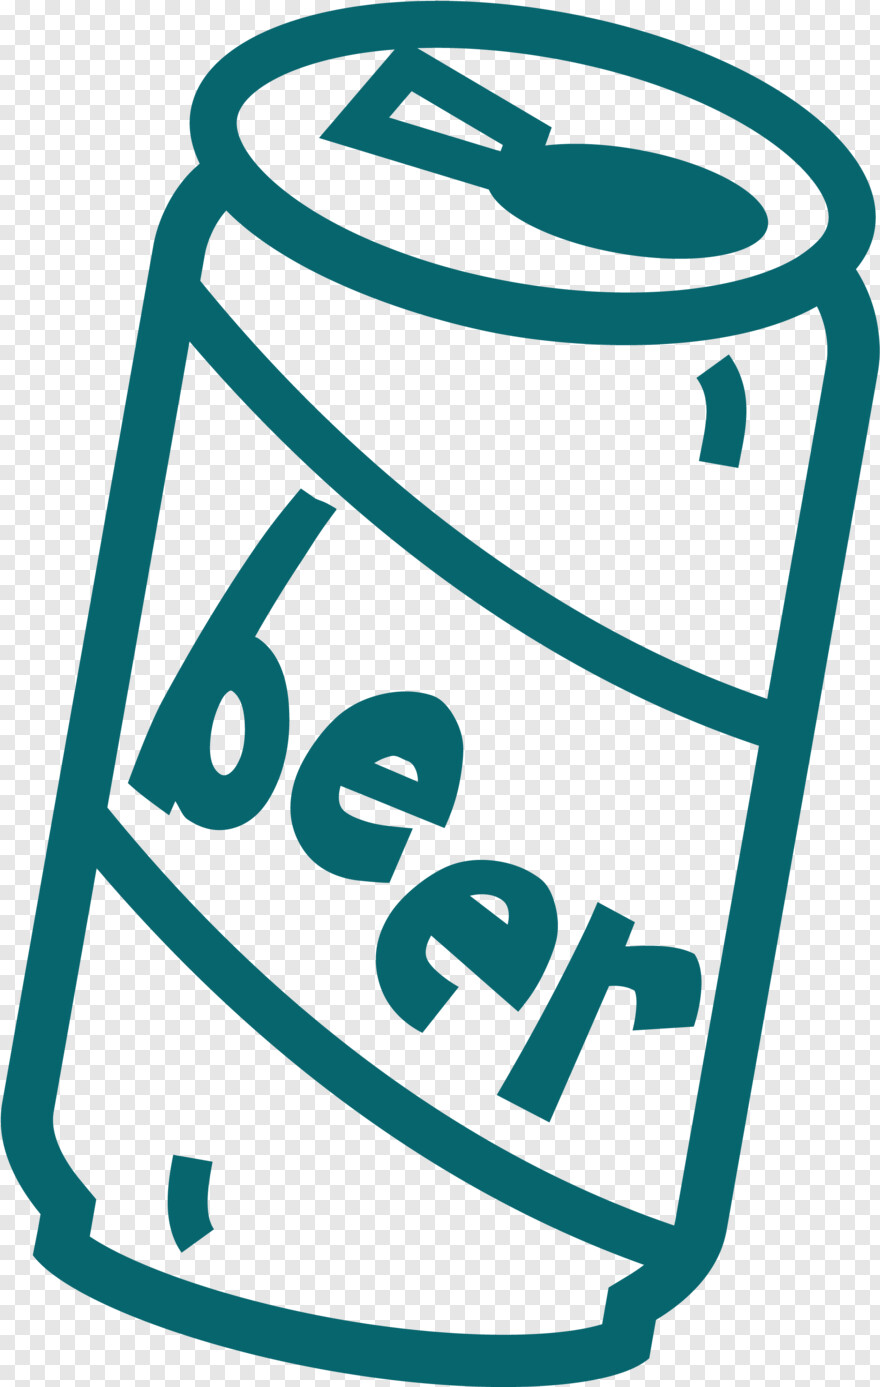  Beer Can, Pepsi Can, Trash Can, Mountain Dew Can, Beer, Beer Mug Clip Art